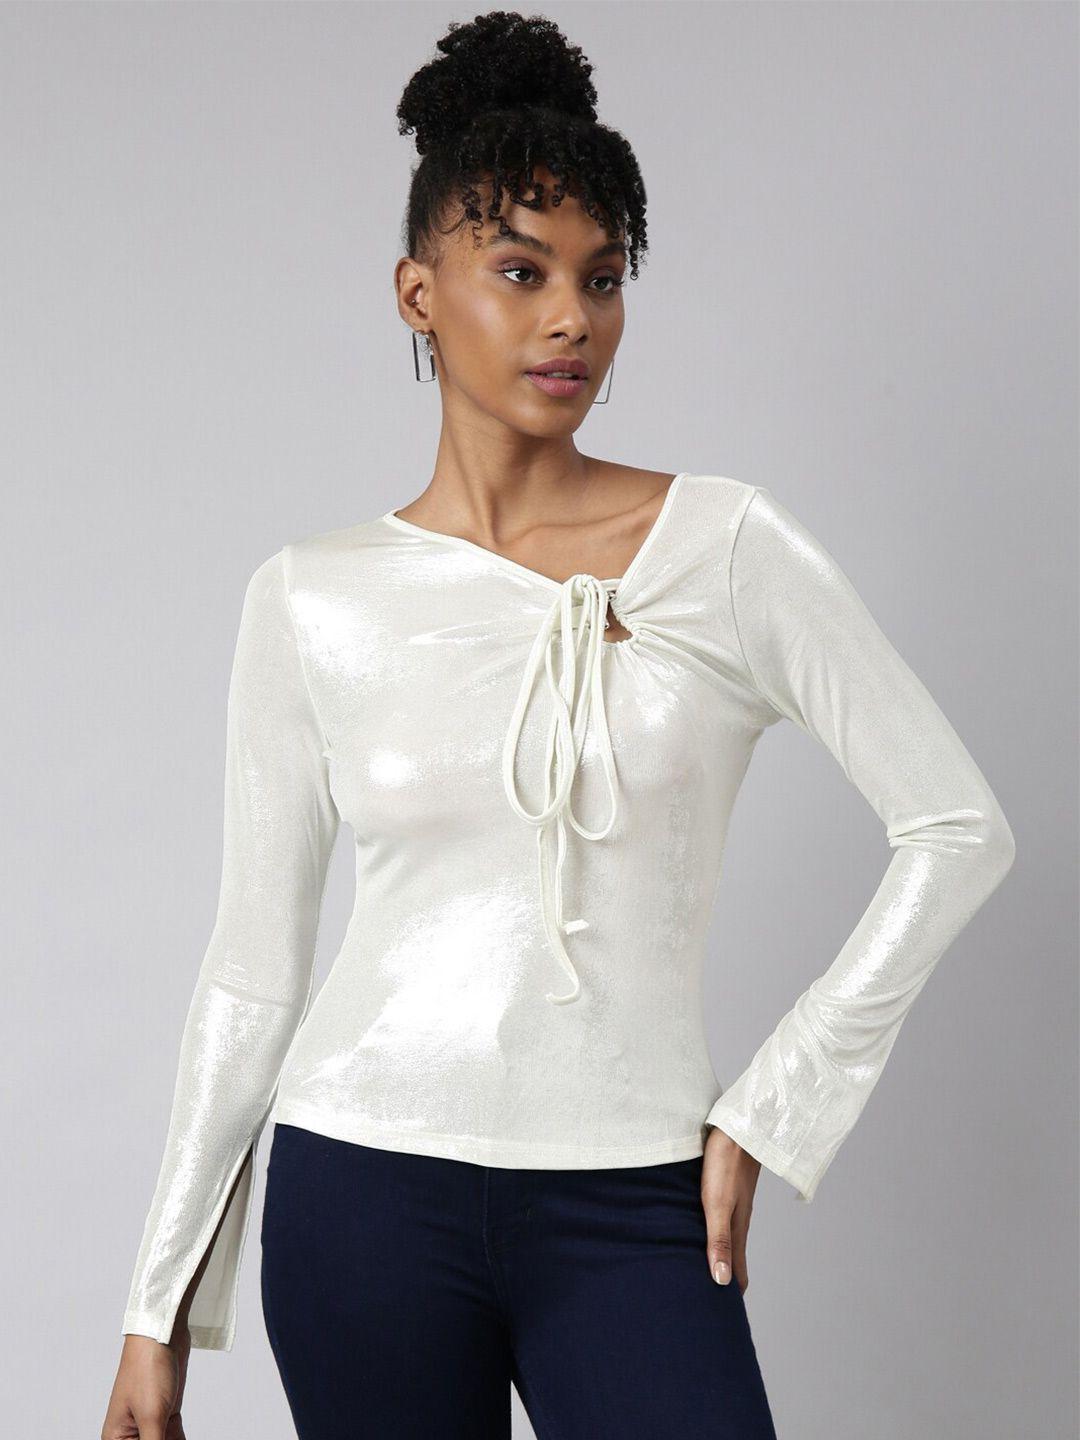 showoff long sleeves tie-up neck top